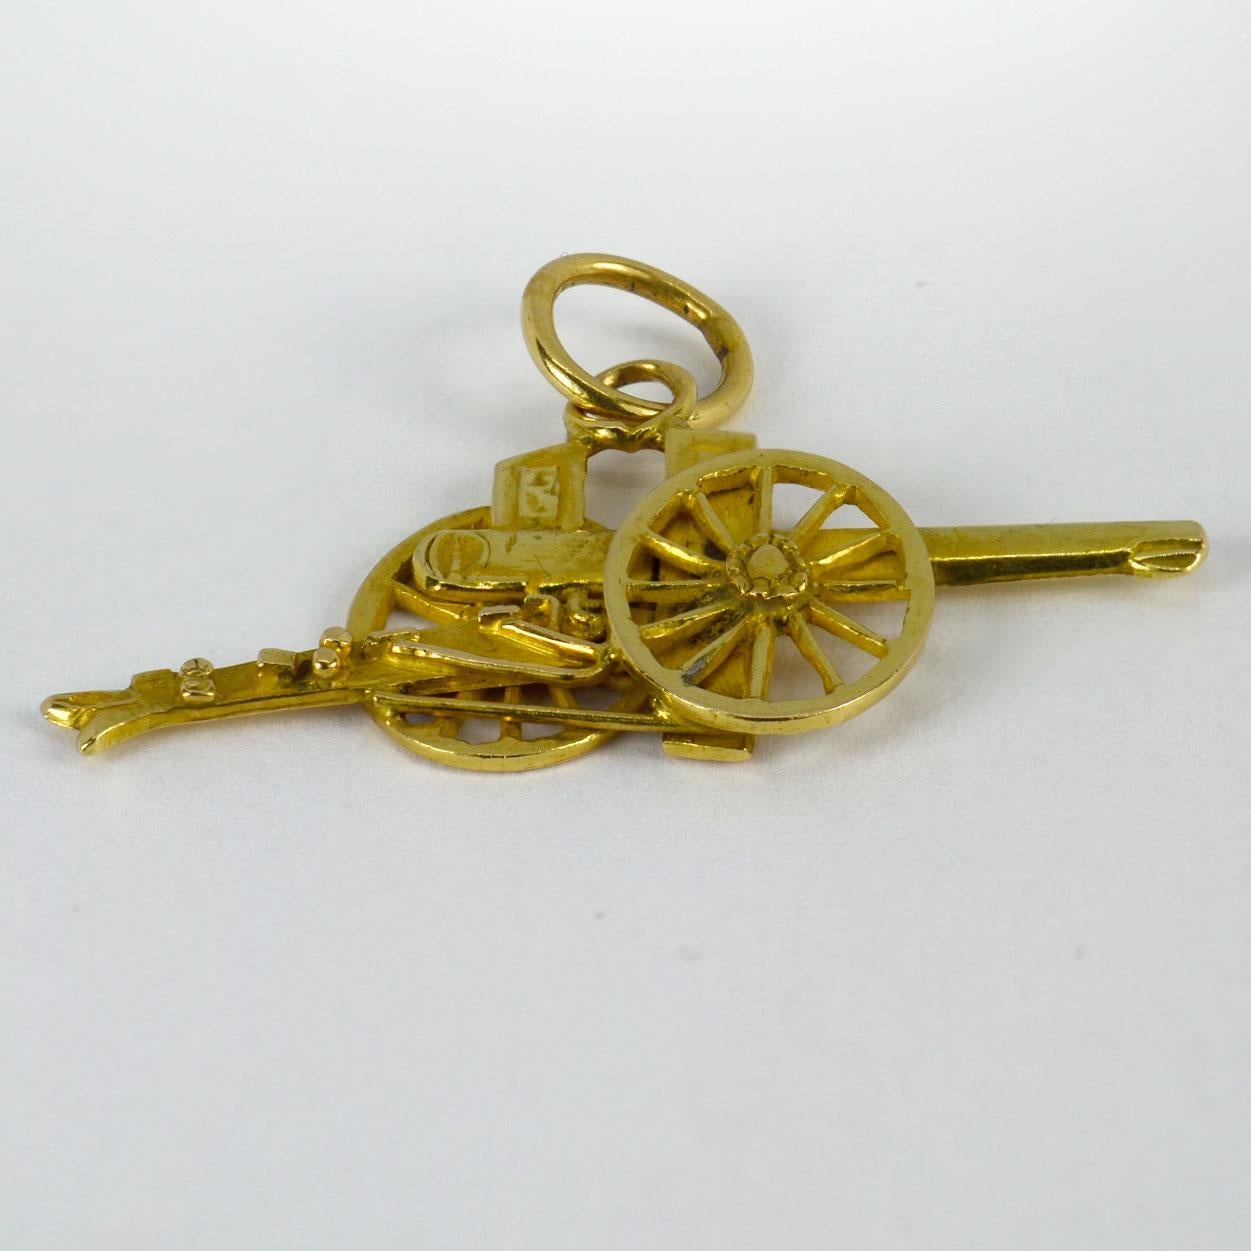 An 18 karat (18K) yellow gold charm pendant designed as a cannon. Stamped with the owl mark for French import and 18 karat gold.

Dimensions: 2.1 x 3.7 x 0.3 cm (not including jump ring)
Weight: 3.82 grams 
